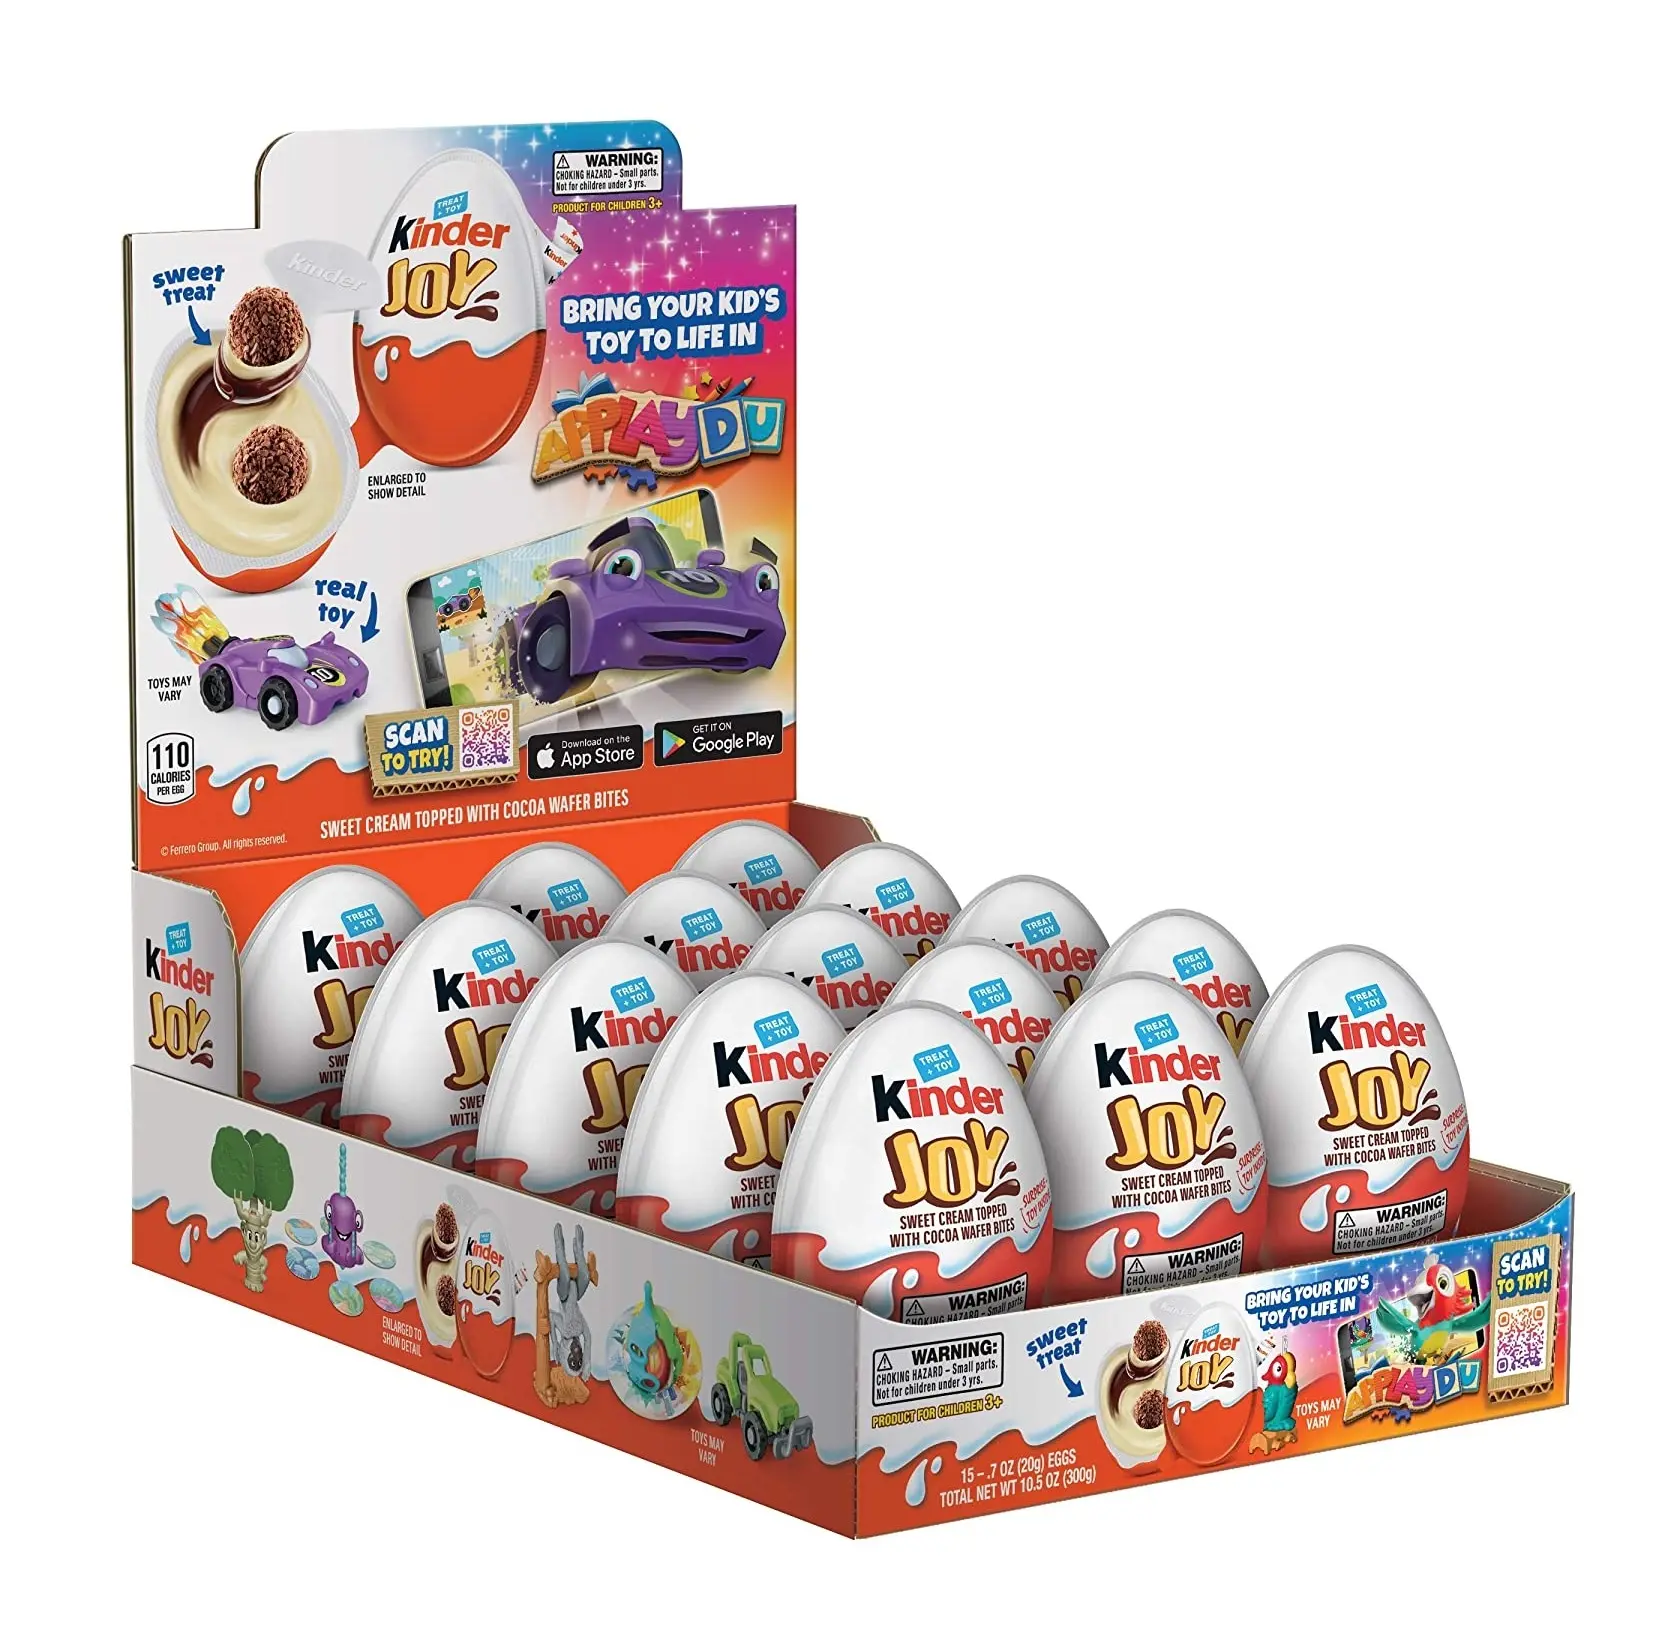 Direct Supplier Of kinder joy chocolate eggs inside Toy At Wholesale Price